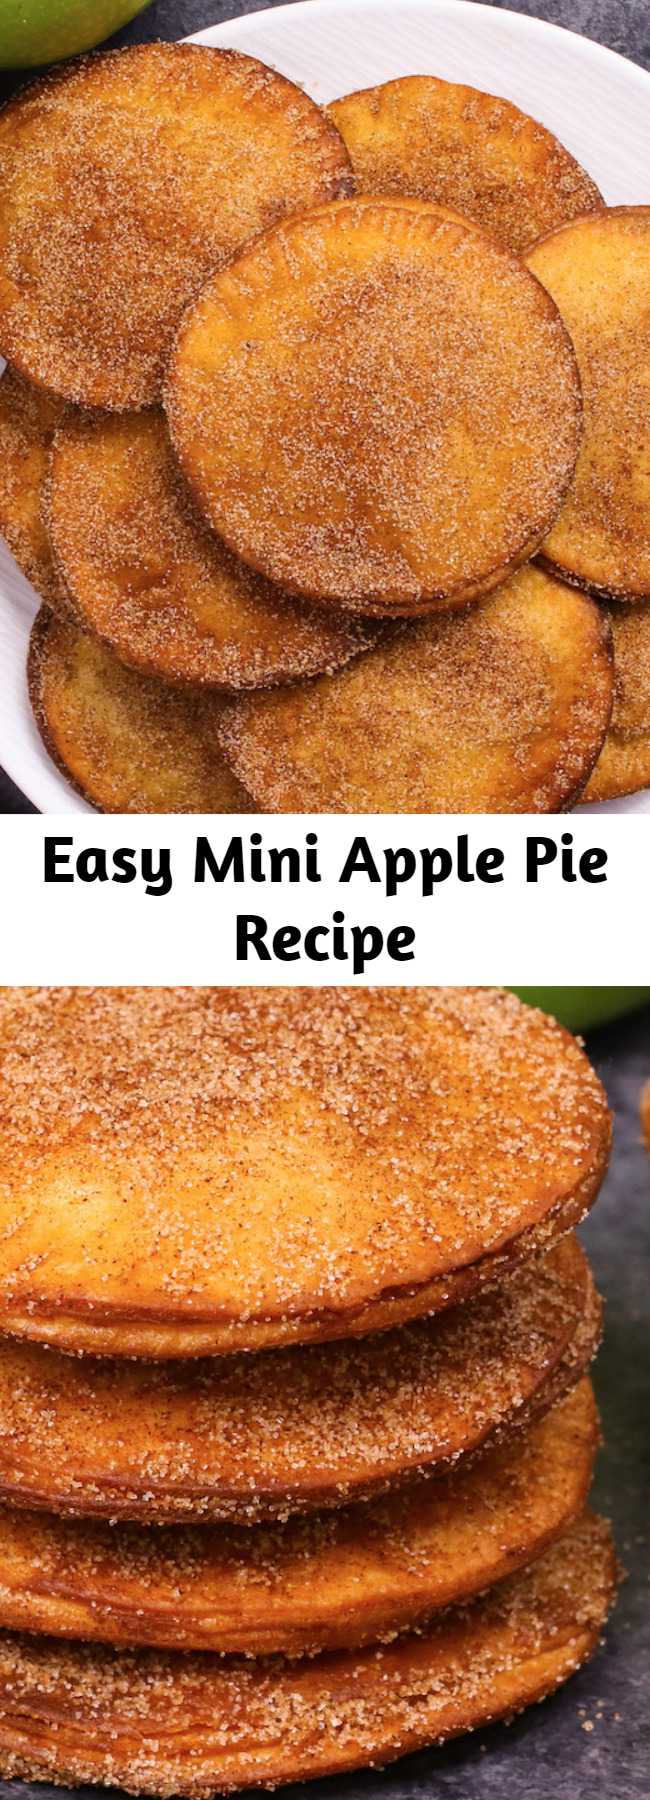 Easy Mini Apple Pie Recipe - Mini Apple Pies have sweet and soft filing with crispy pie on the outside. It’s simple to make and takes less than 20 minutes. It’s one of my favorite dessert recipes.